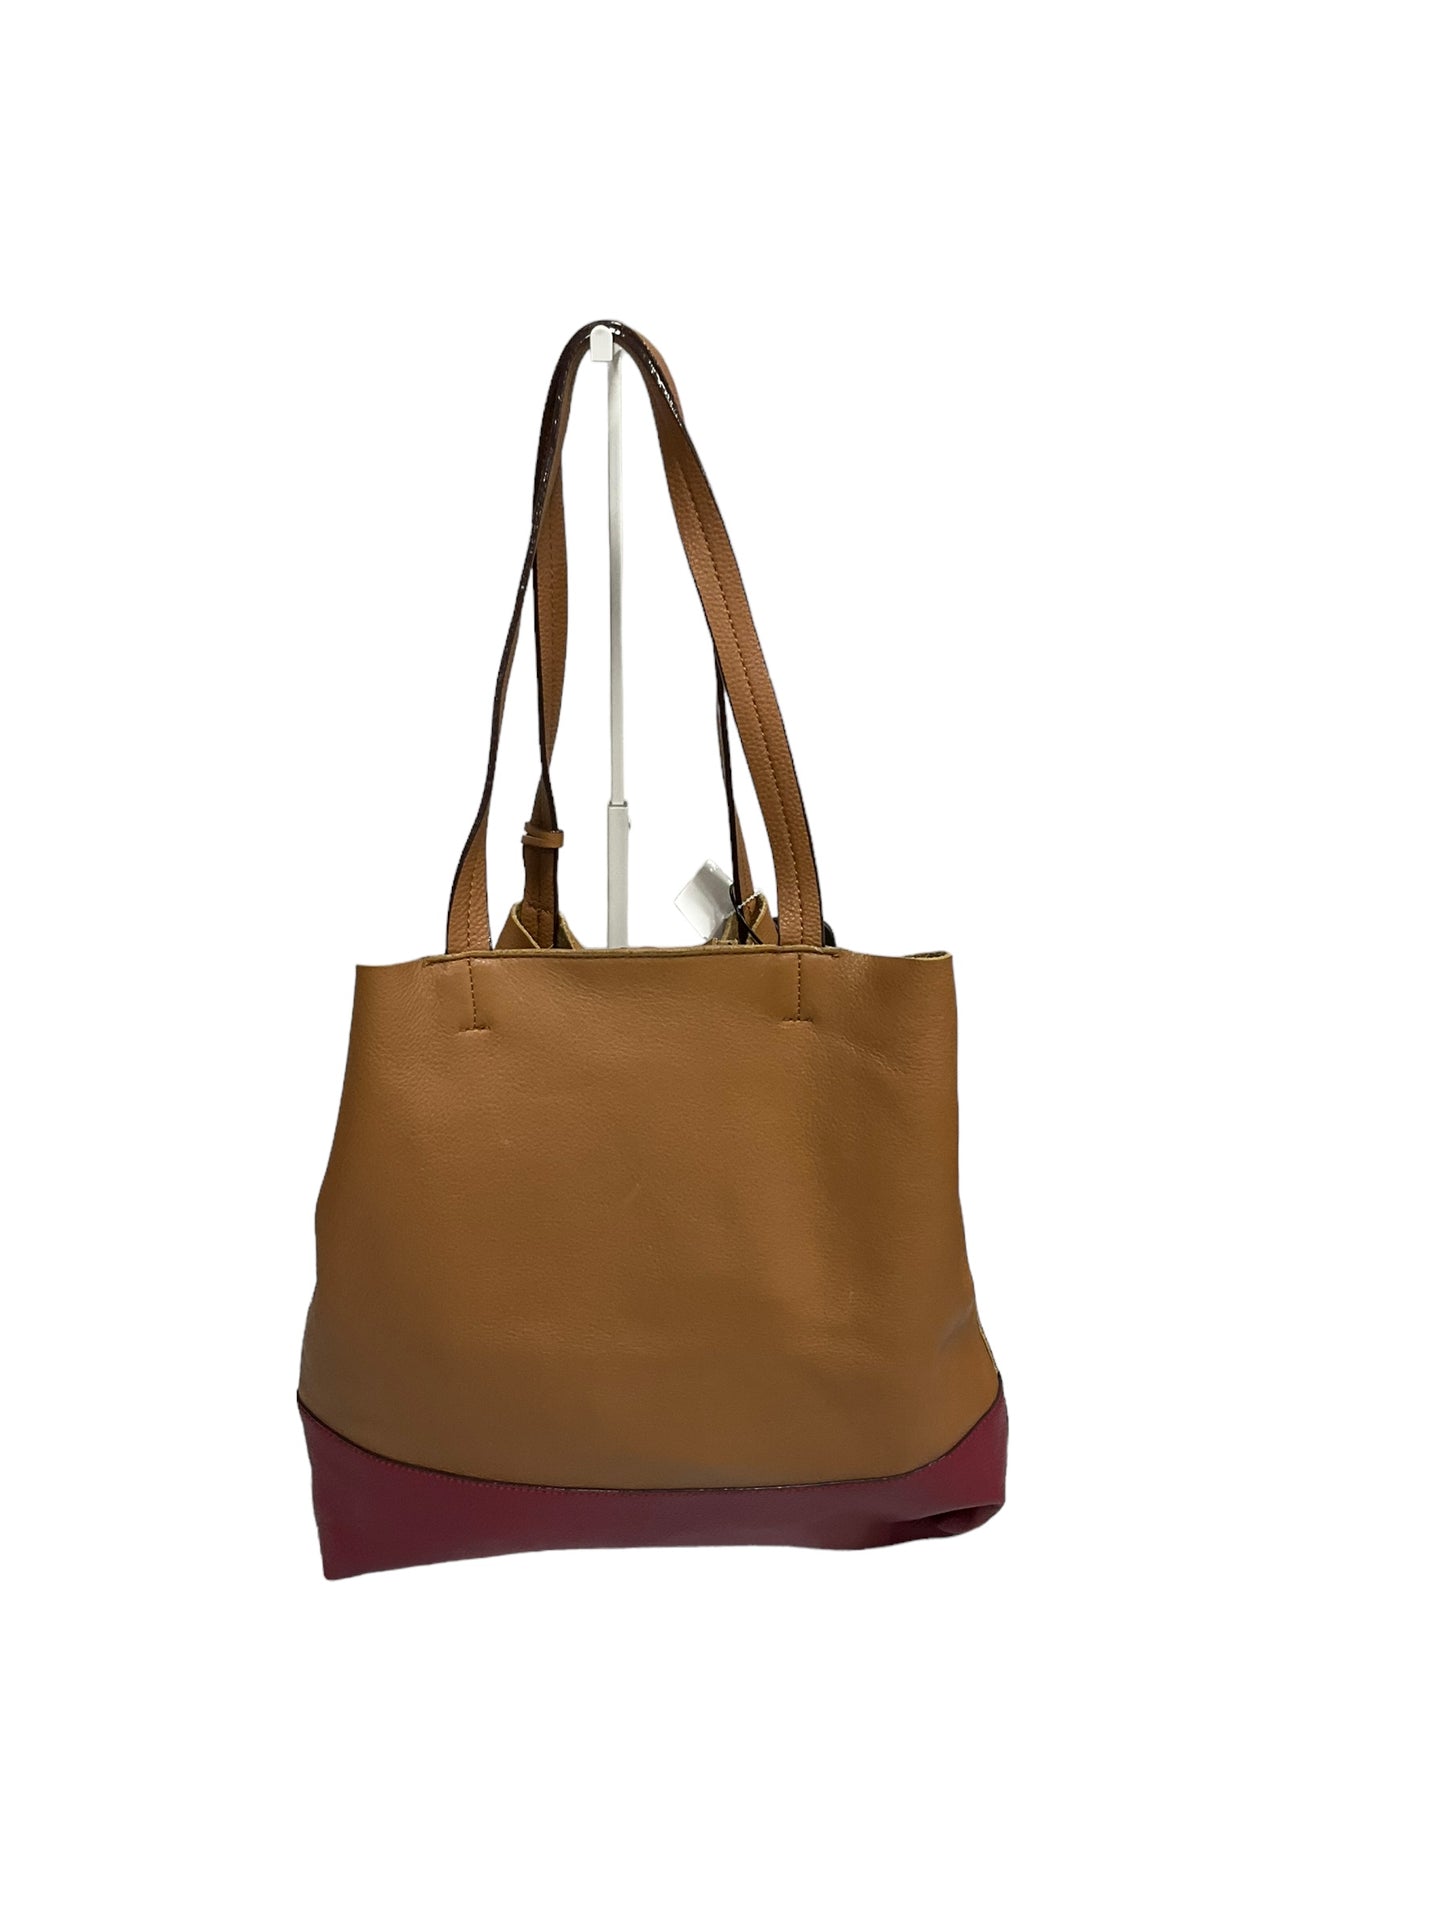 Tote By Sanctuary  Size: Medium